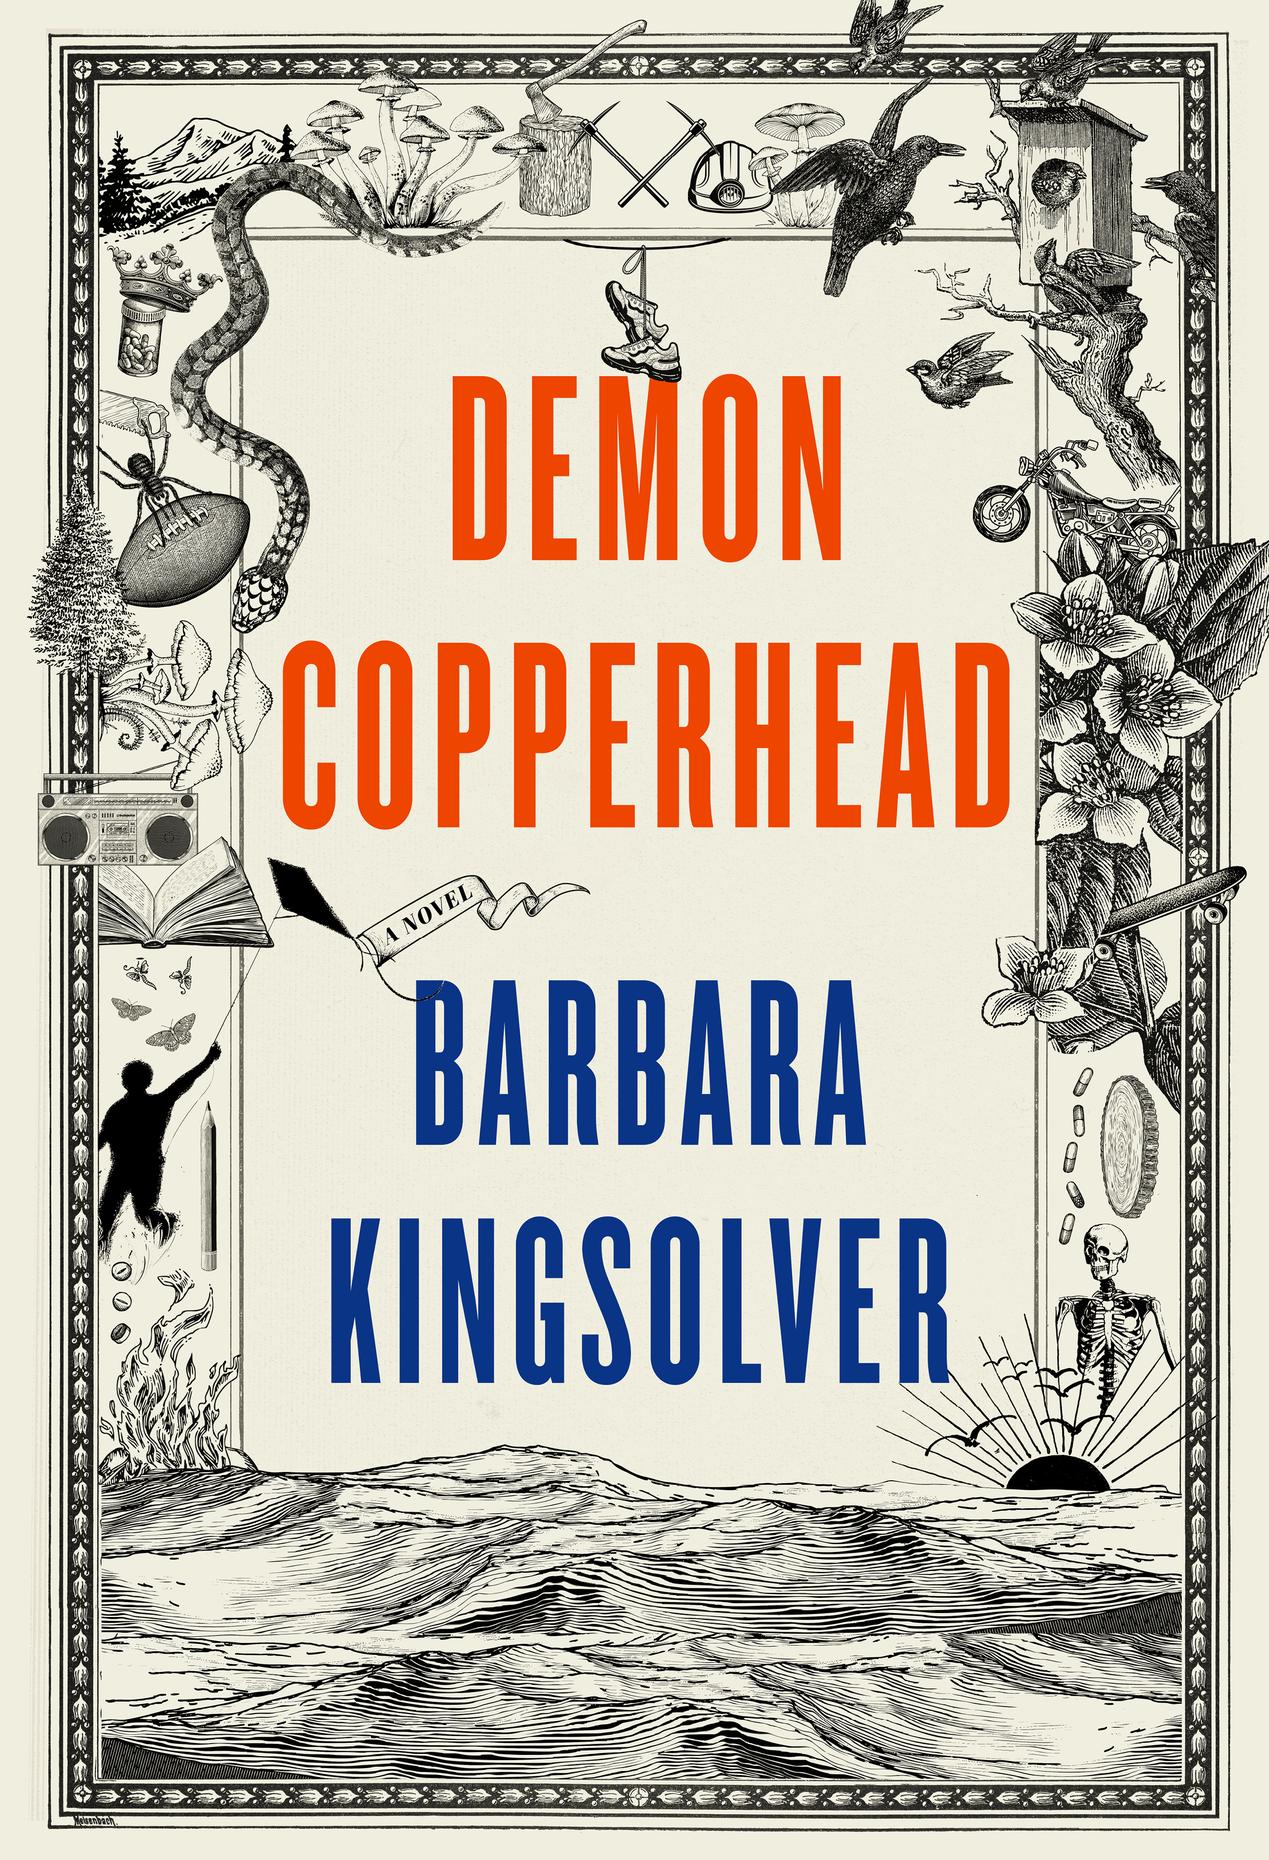 new york times book review demon copperhead